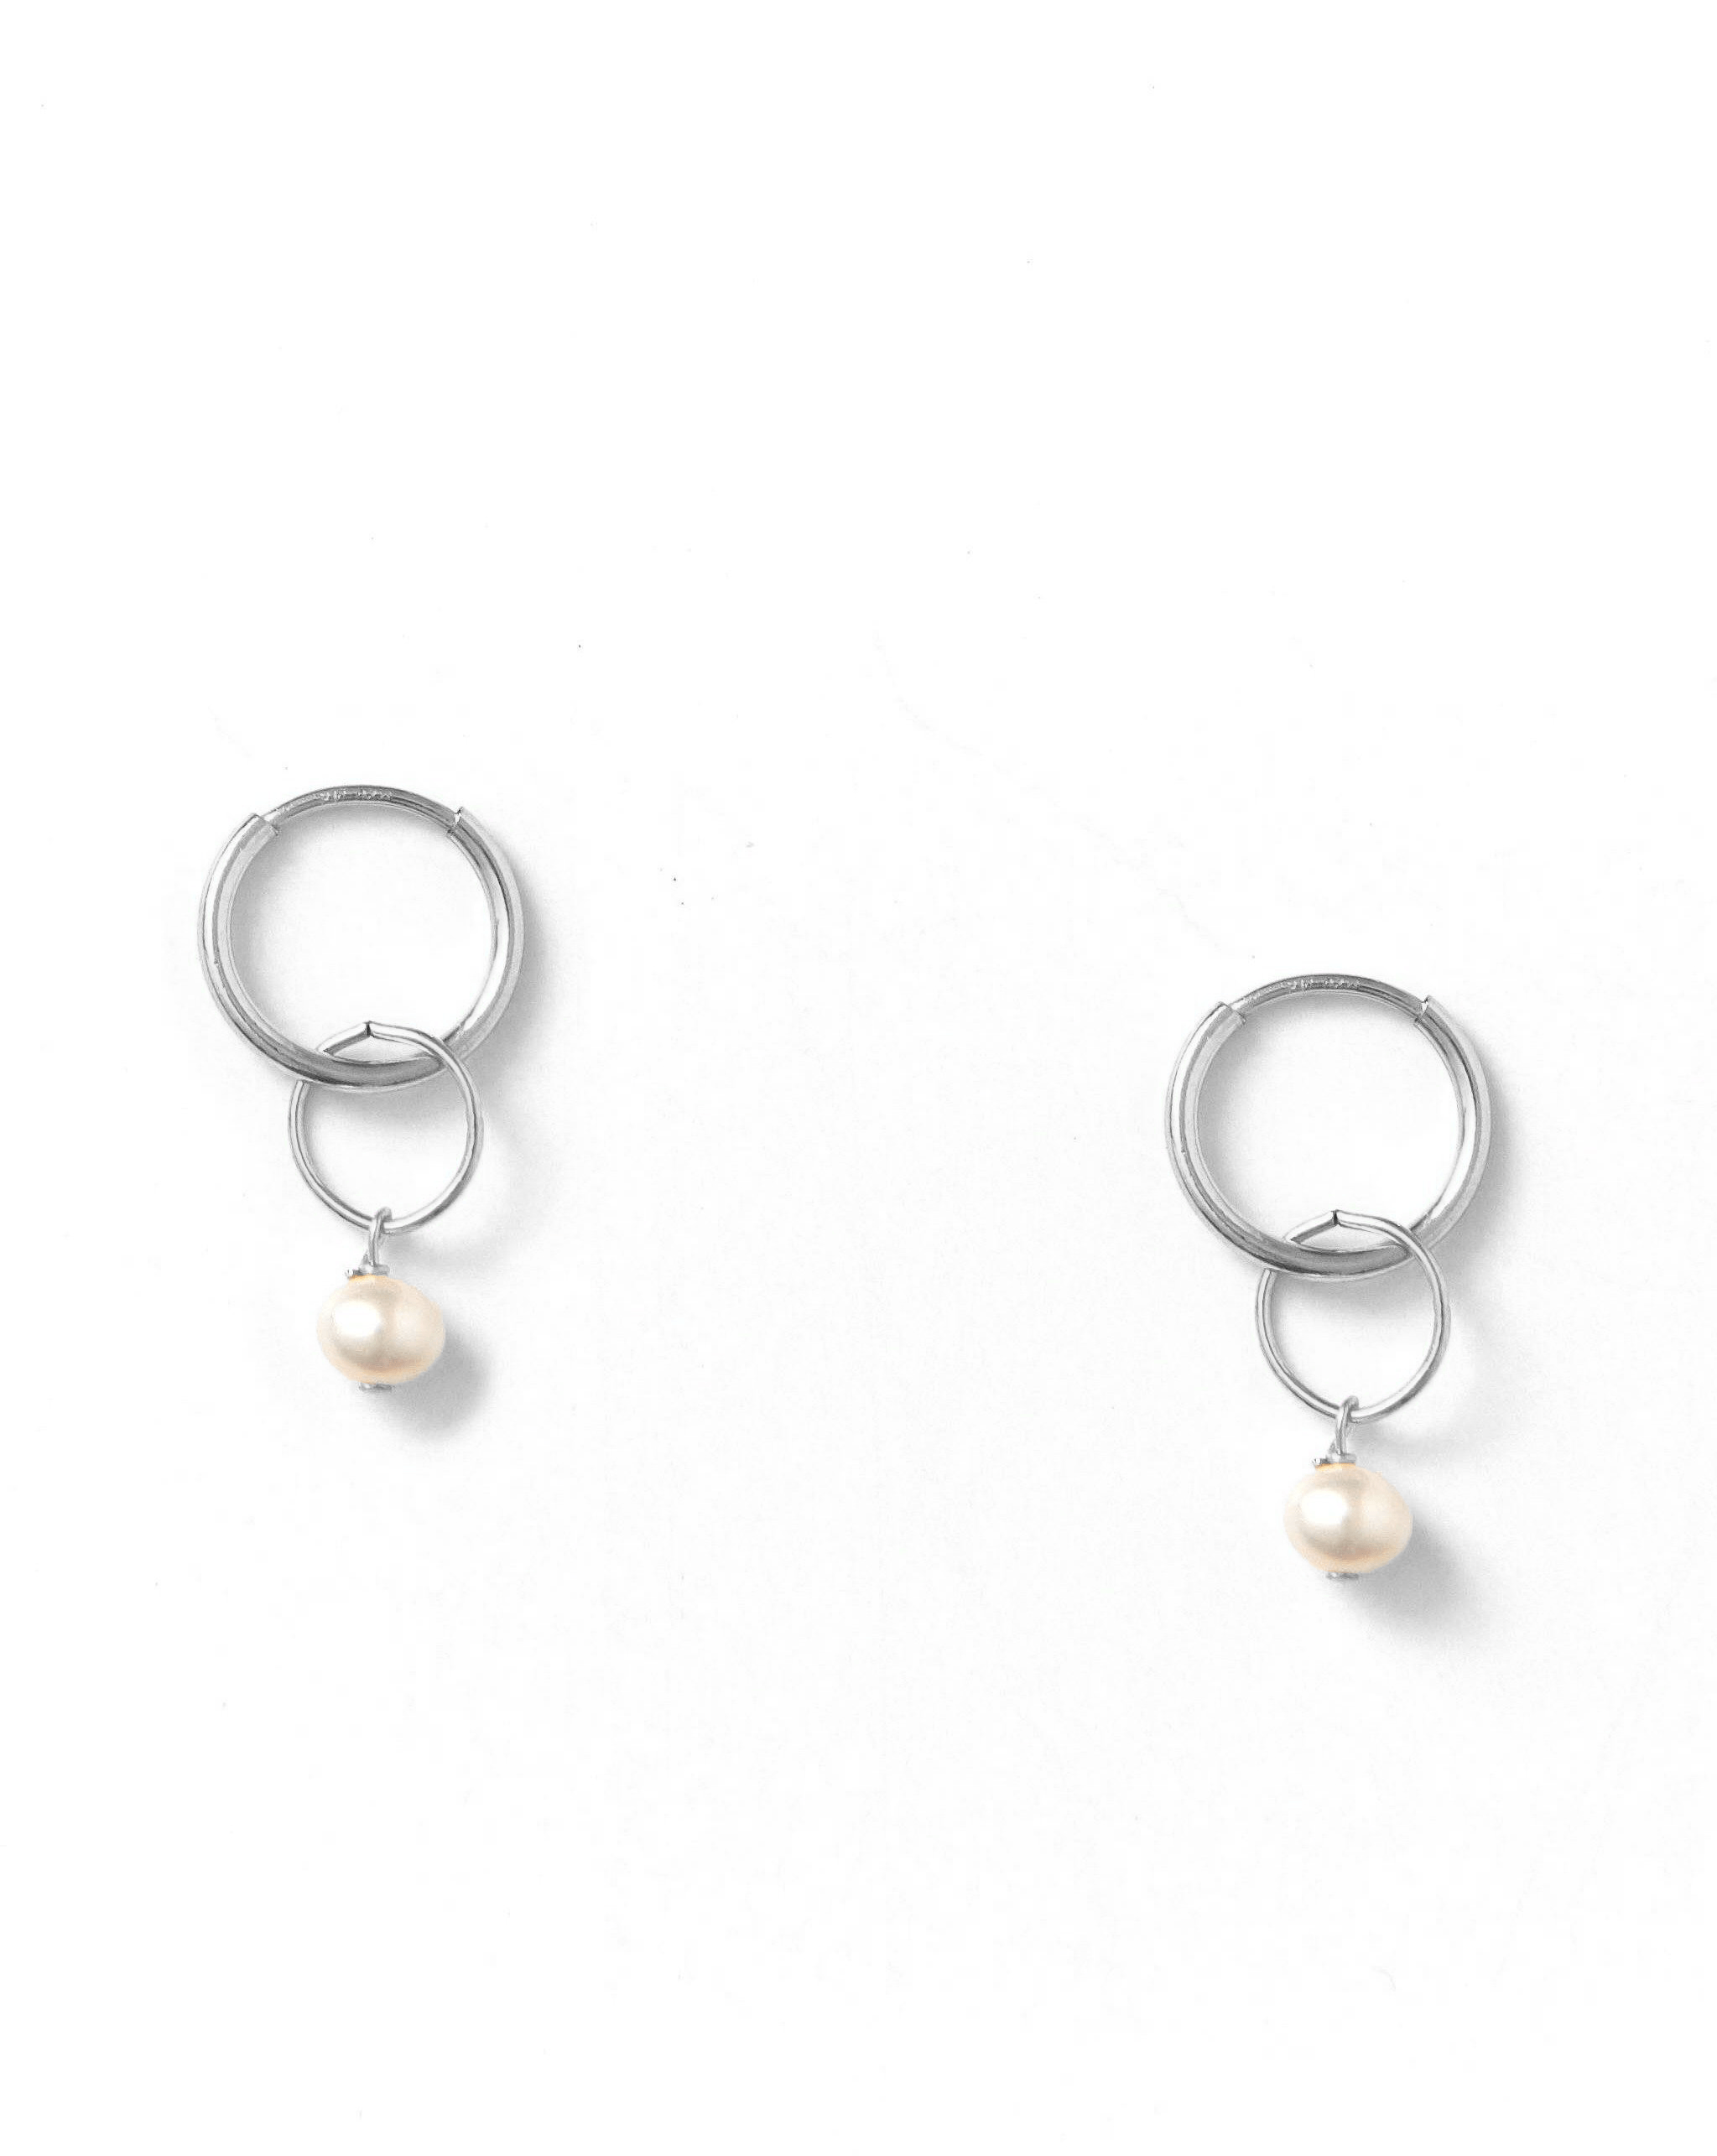 Caen Pearl Hoops by KOZAKH. 12mm hoop earrings, crafted in Sterling Silver, featuring 6mm to 7mm Pearls.